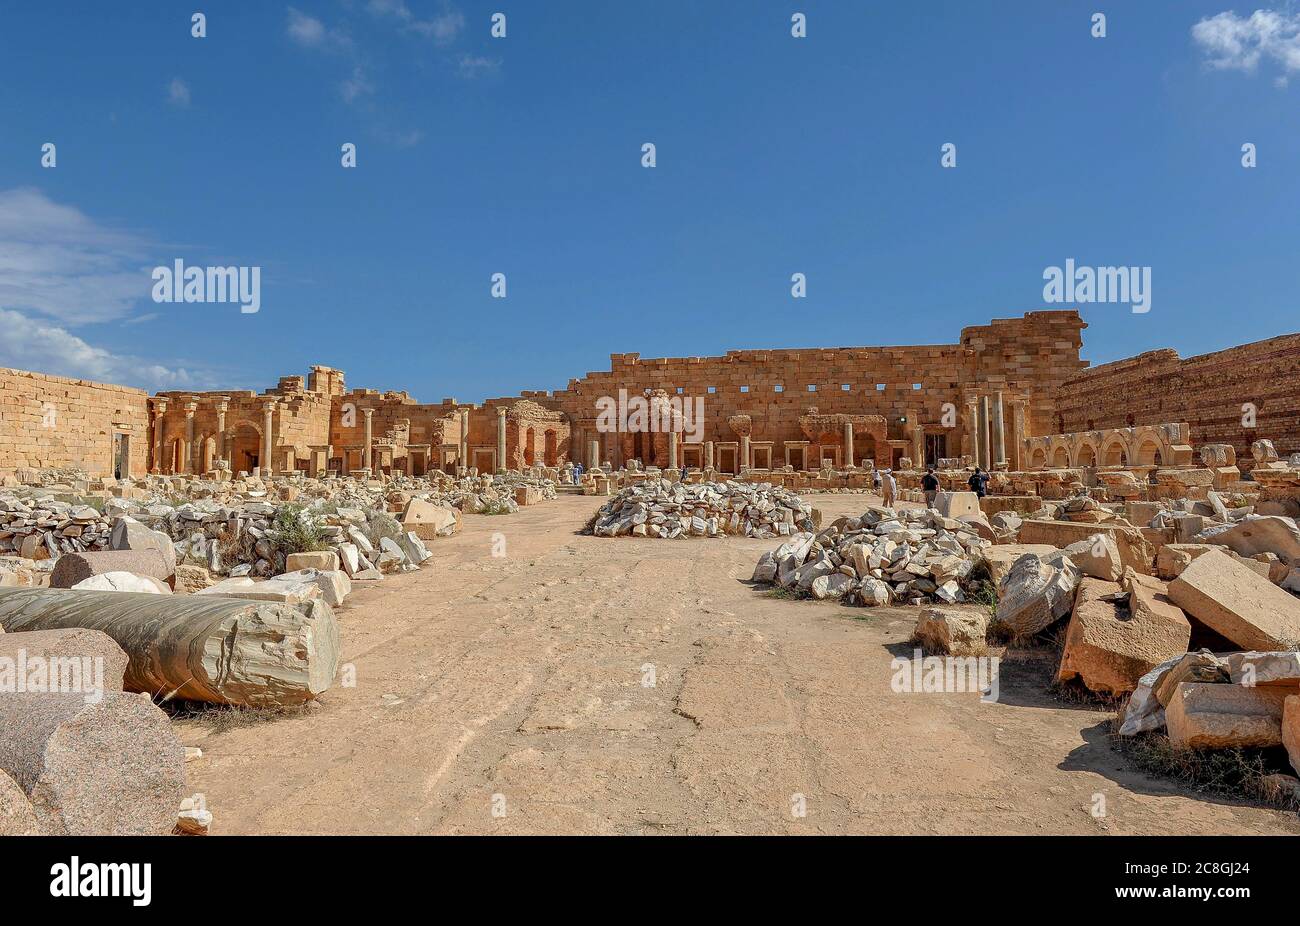 View of remains, square with stones and columns, new forum, ruined city Leptis Magna, Libya Stock Photo